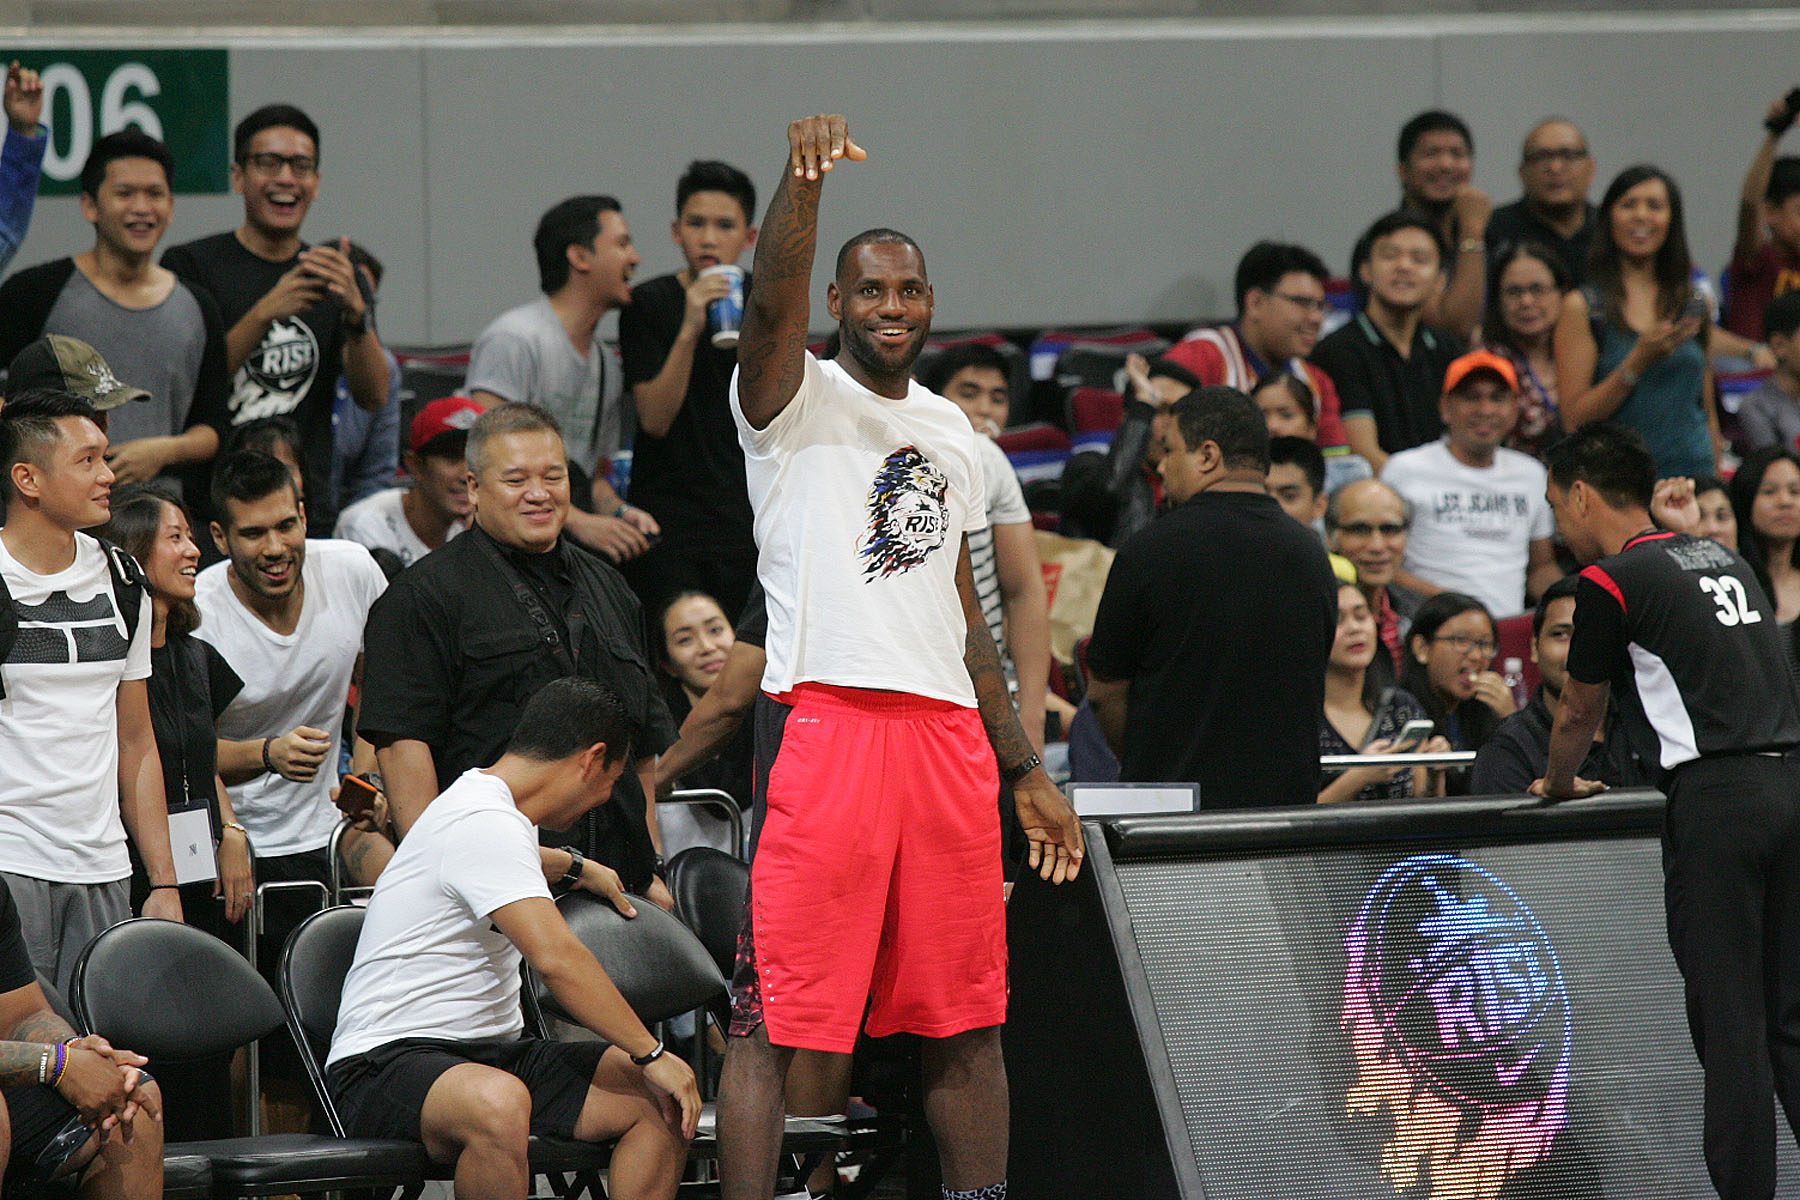 JAMES FOR 3. LeBron makes a 3-pointer while sitting on the bench as teams warmed up. He is seen here on his feet after the shot, marvelling his handy work. Photo by Josh Albelda/Rappler 